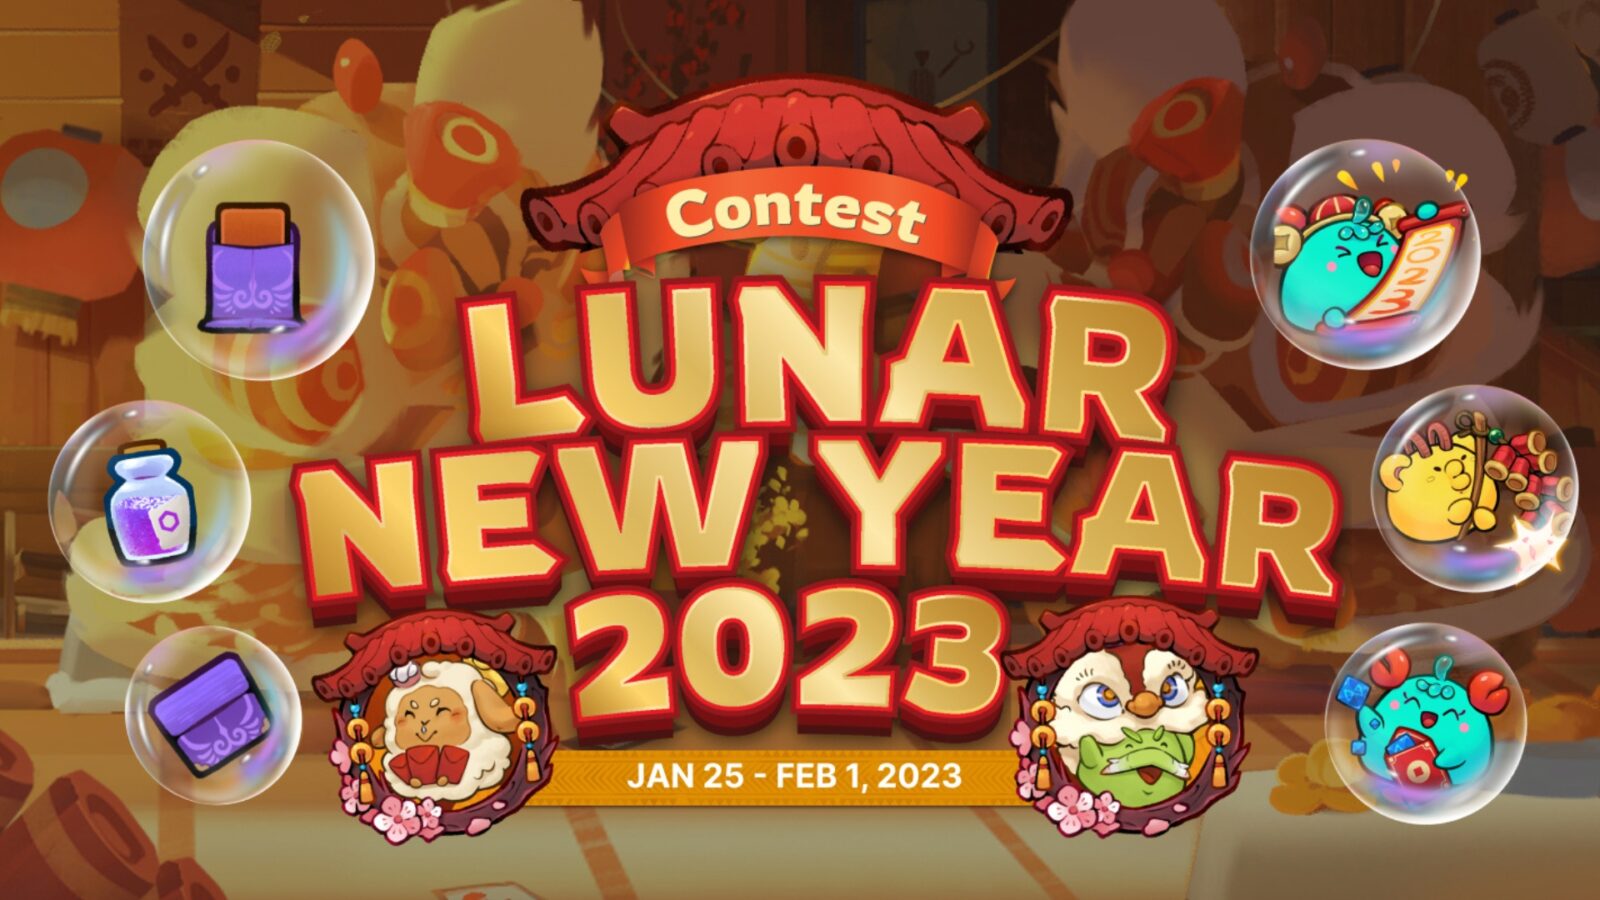 Axie Infinity is celebrating Lunar New Year 2023 with the launch of a special event. From today Jan. 25, until Wednesday, Feb. 1, any community member can join and earn Moon Shards and Moon Dust by completing missions in the arena.